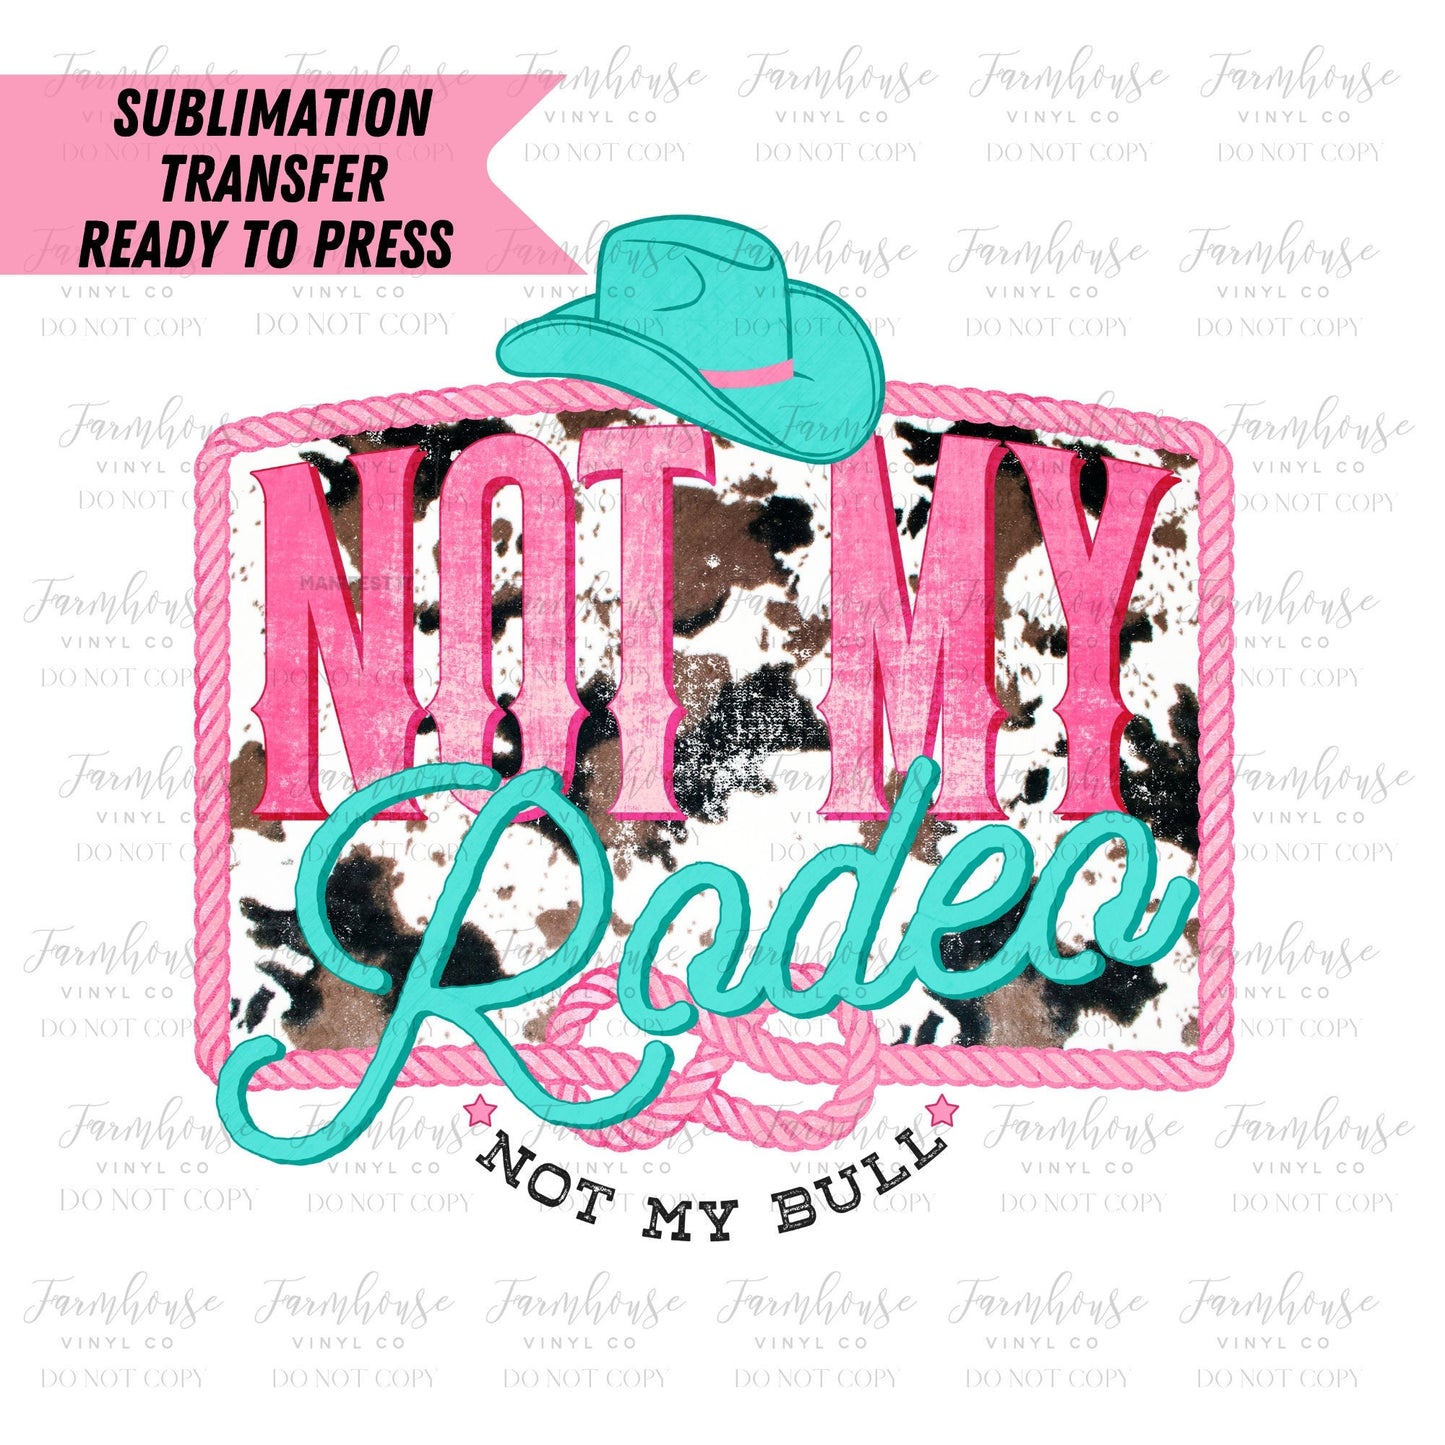 Not My Rodeo Not My Bull, Ready To Press, Sublimation Transfer, Sublimation Print, Rodeo Babe, Country Fan Design, Turquoise and Pink Design - Farmhouse Vinyl Co